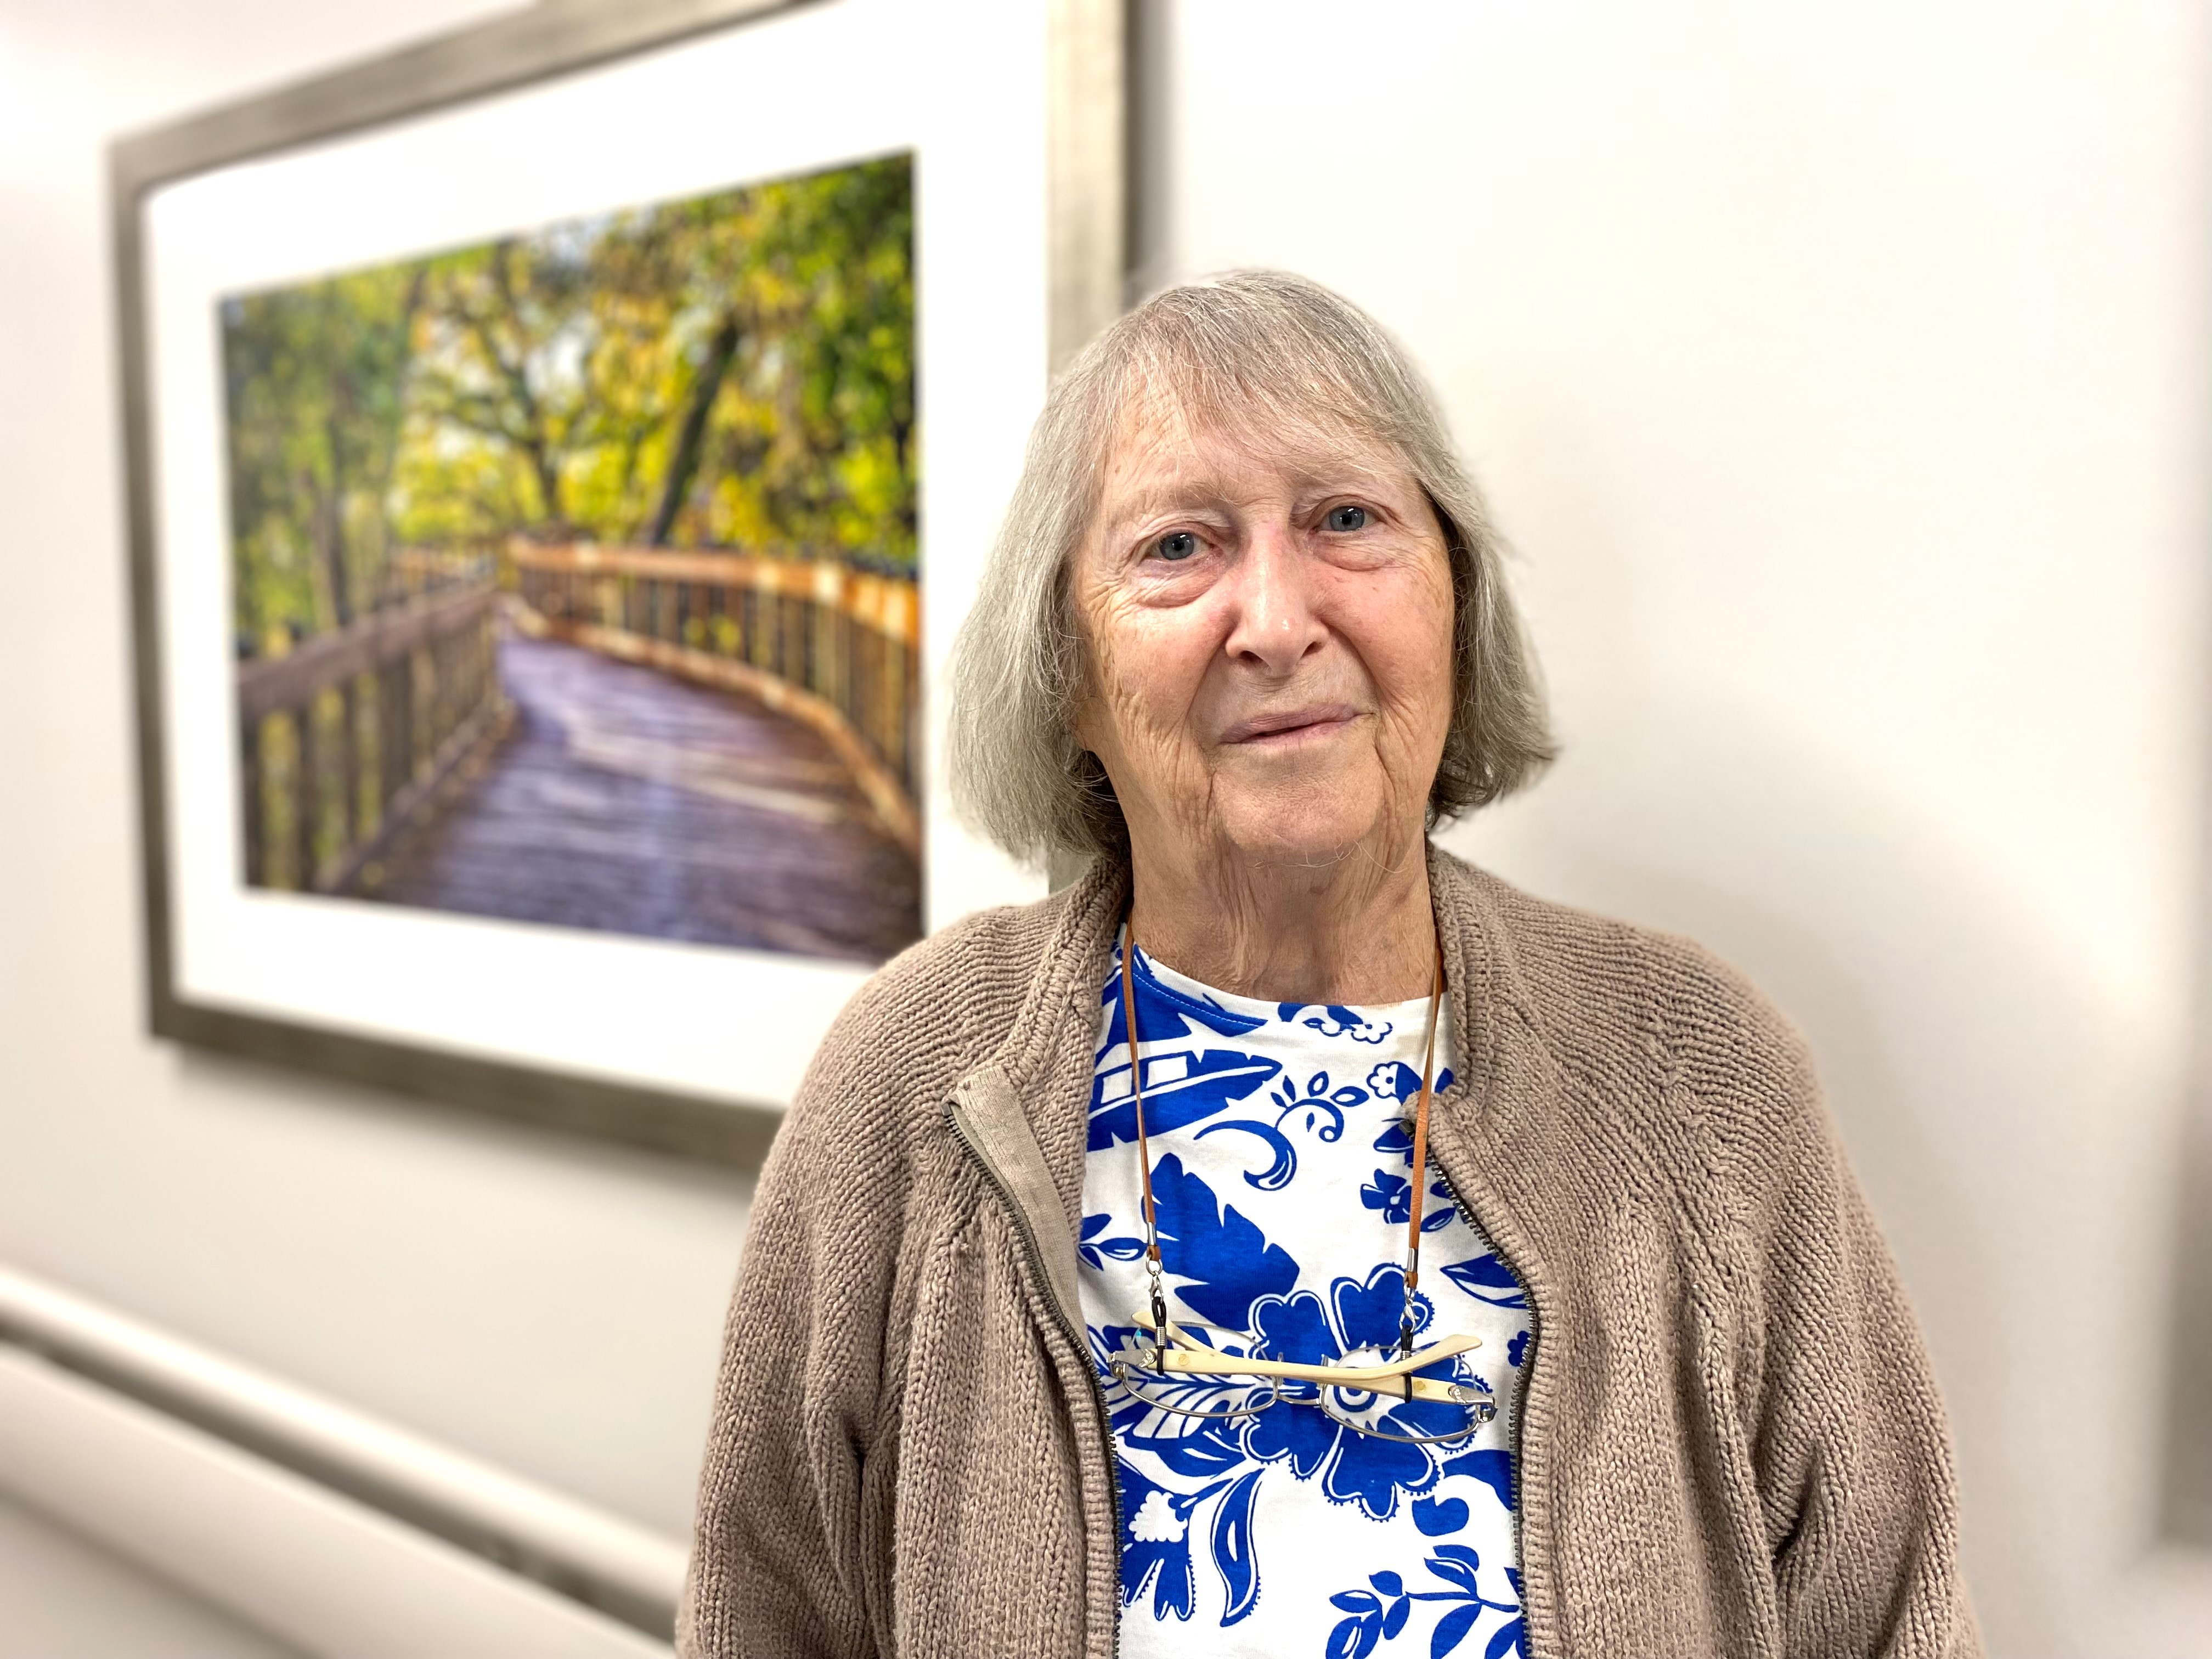 Patsy, recovered, standing in a hallway in front of a picture of a path through green woods.